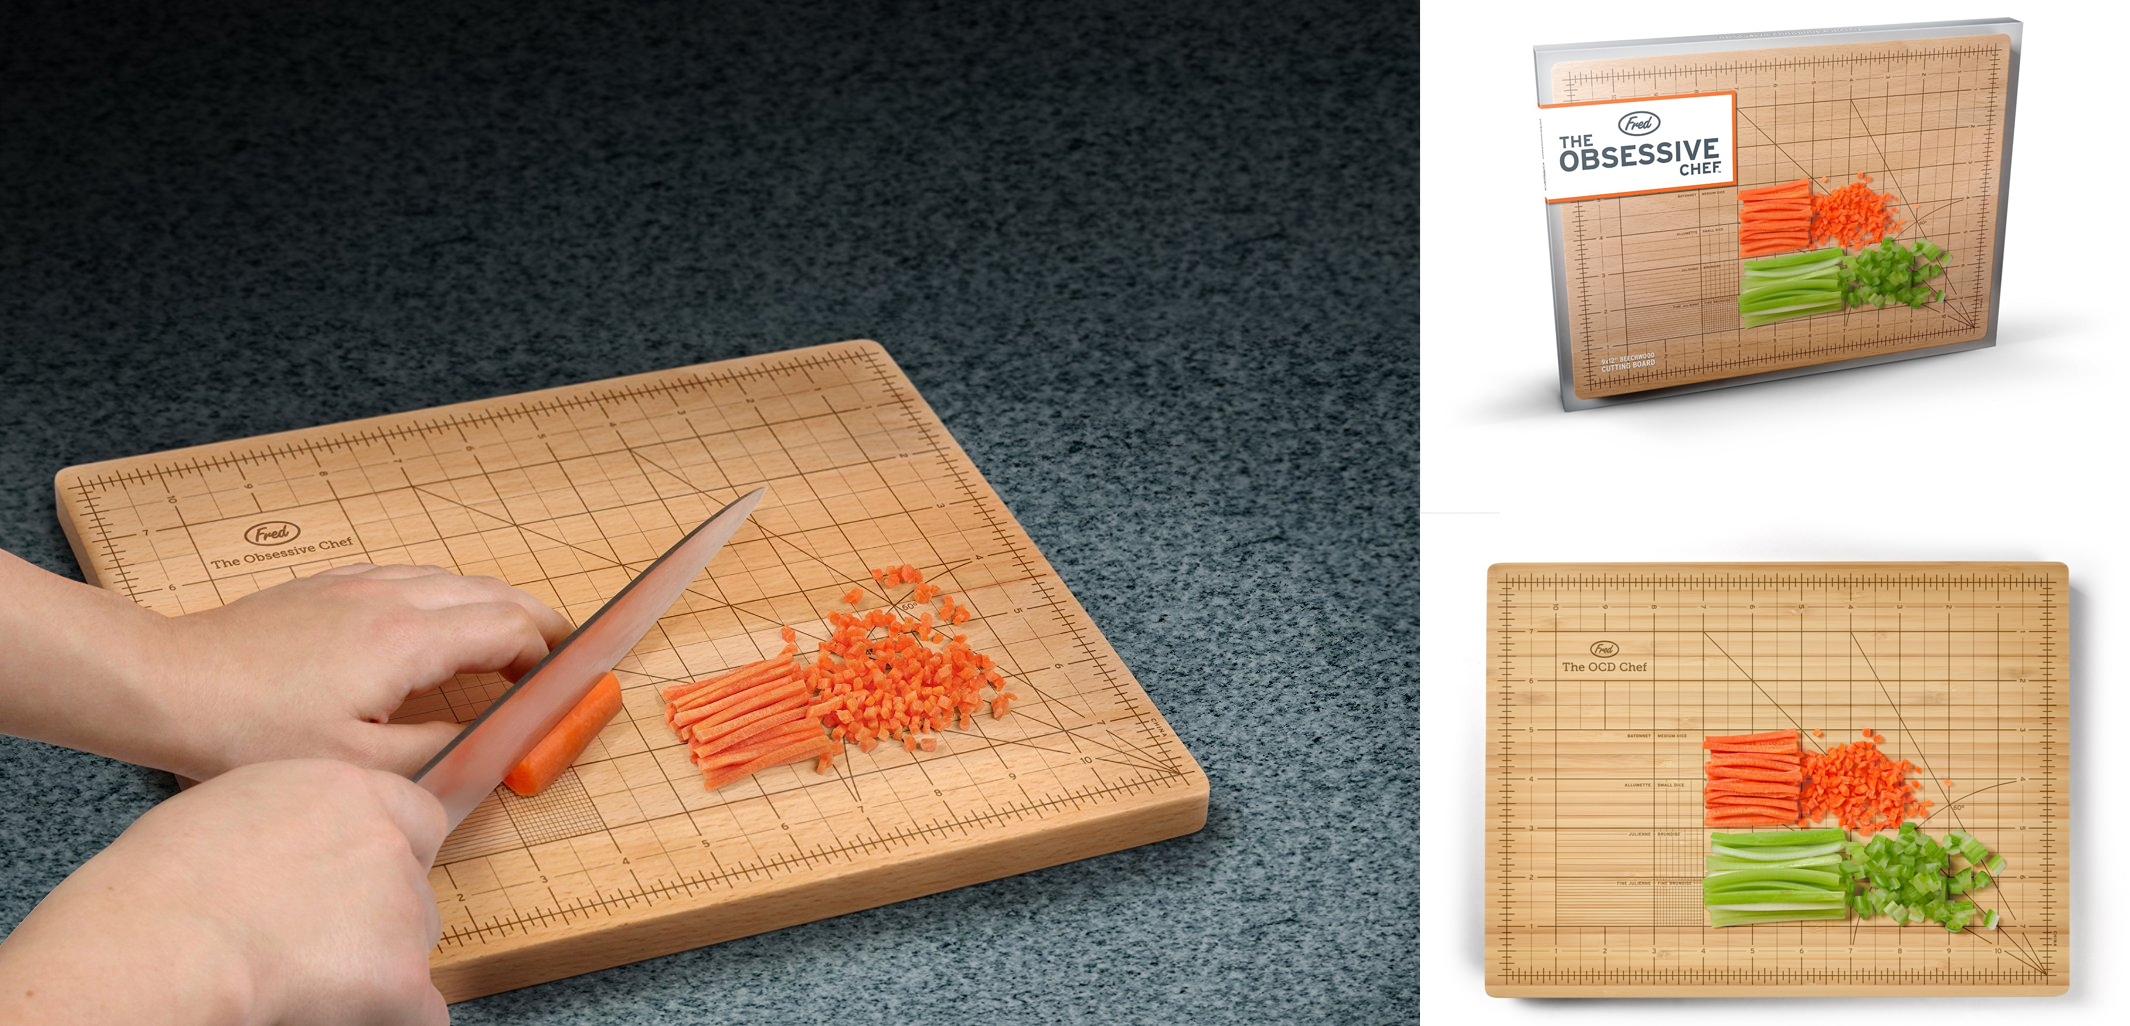 10-clever-kitchen-gifts-everyone-will-love-to-get-the-obsessive-chef-bamboo-cutting-board